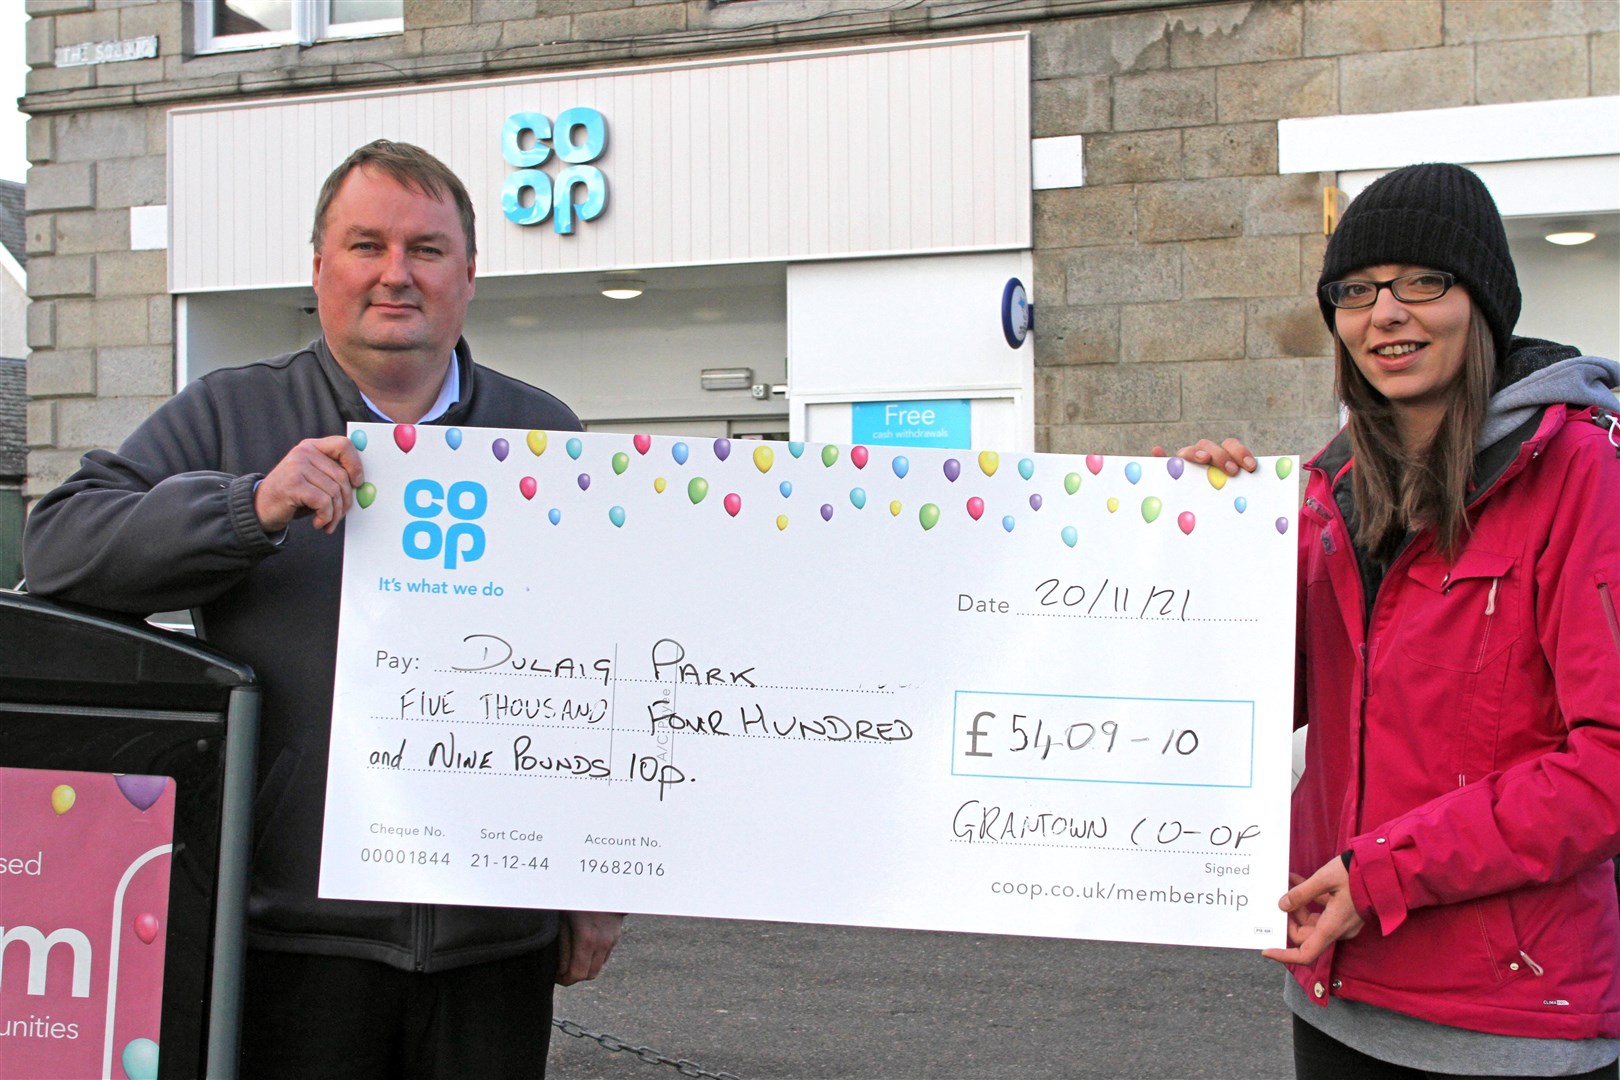 PLAY BOOST: Grantown Coop store manager Derek Blaney presents the Dulaig Park renovation project cheque to Debbie Mackie.